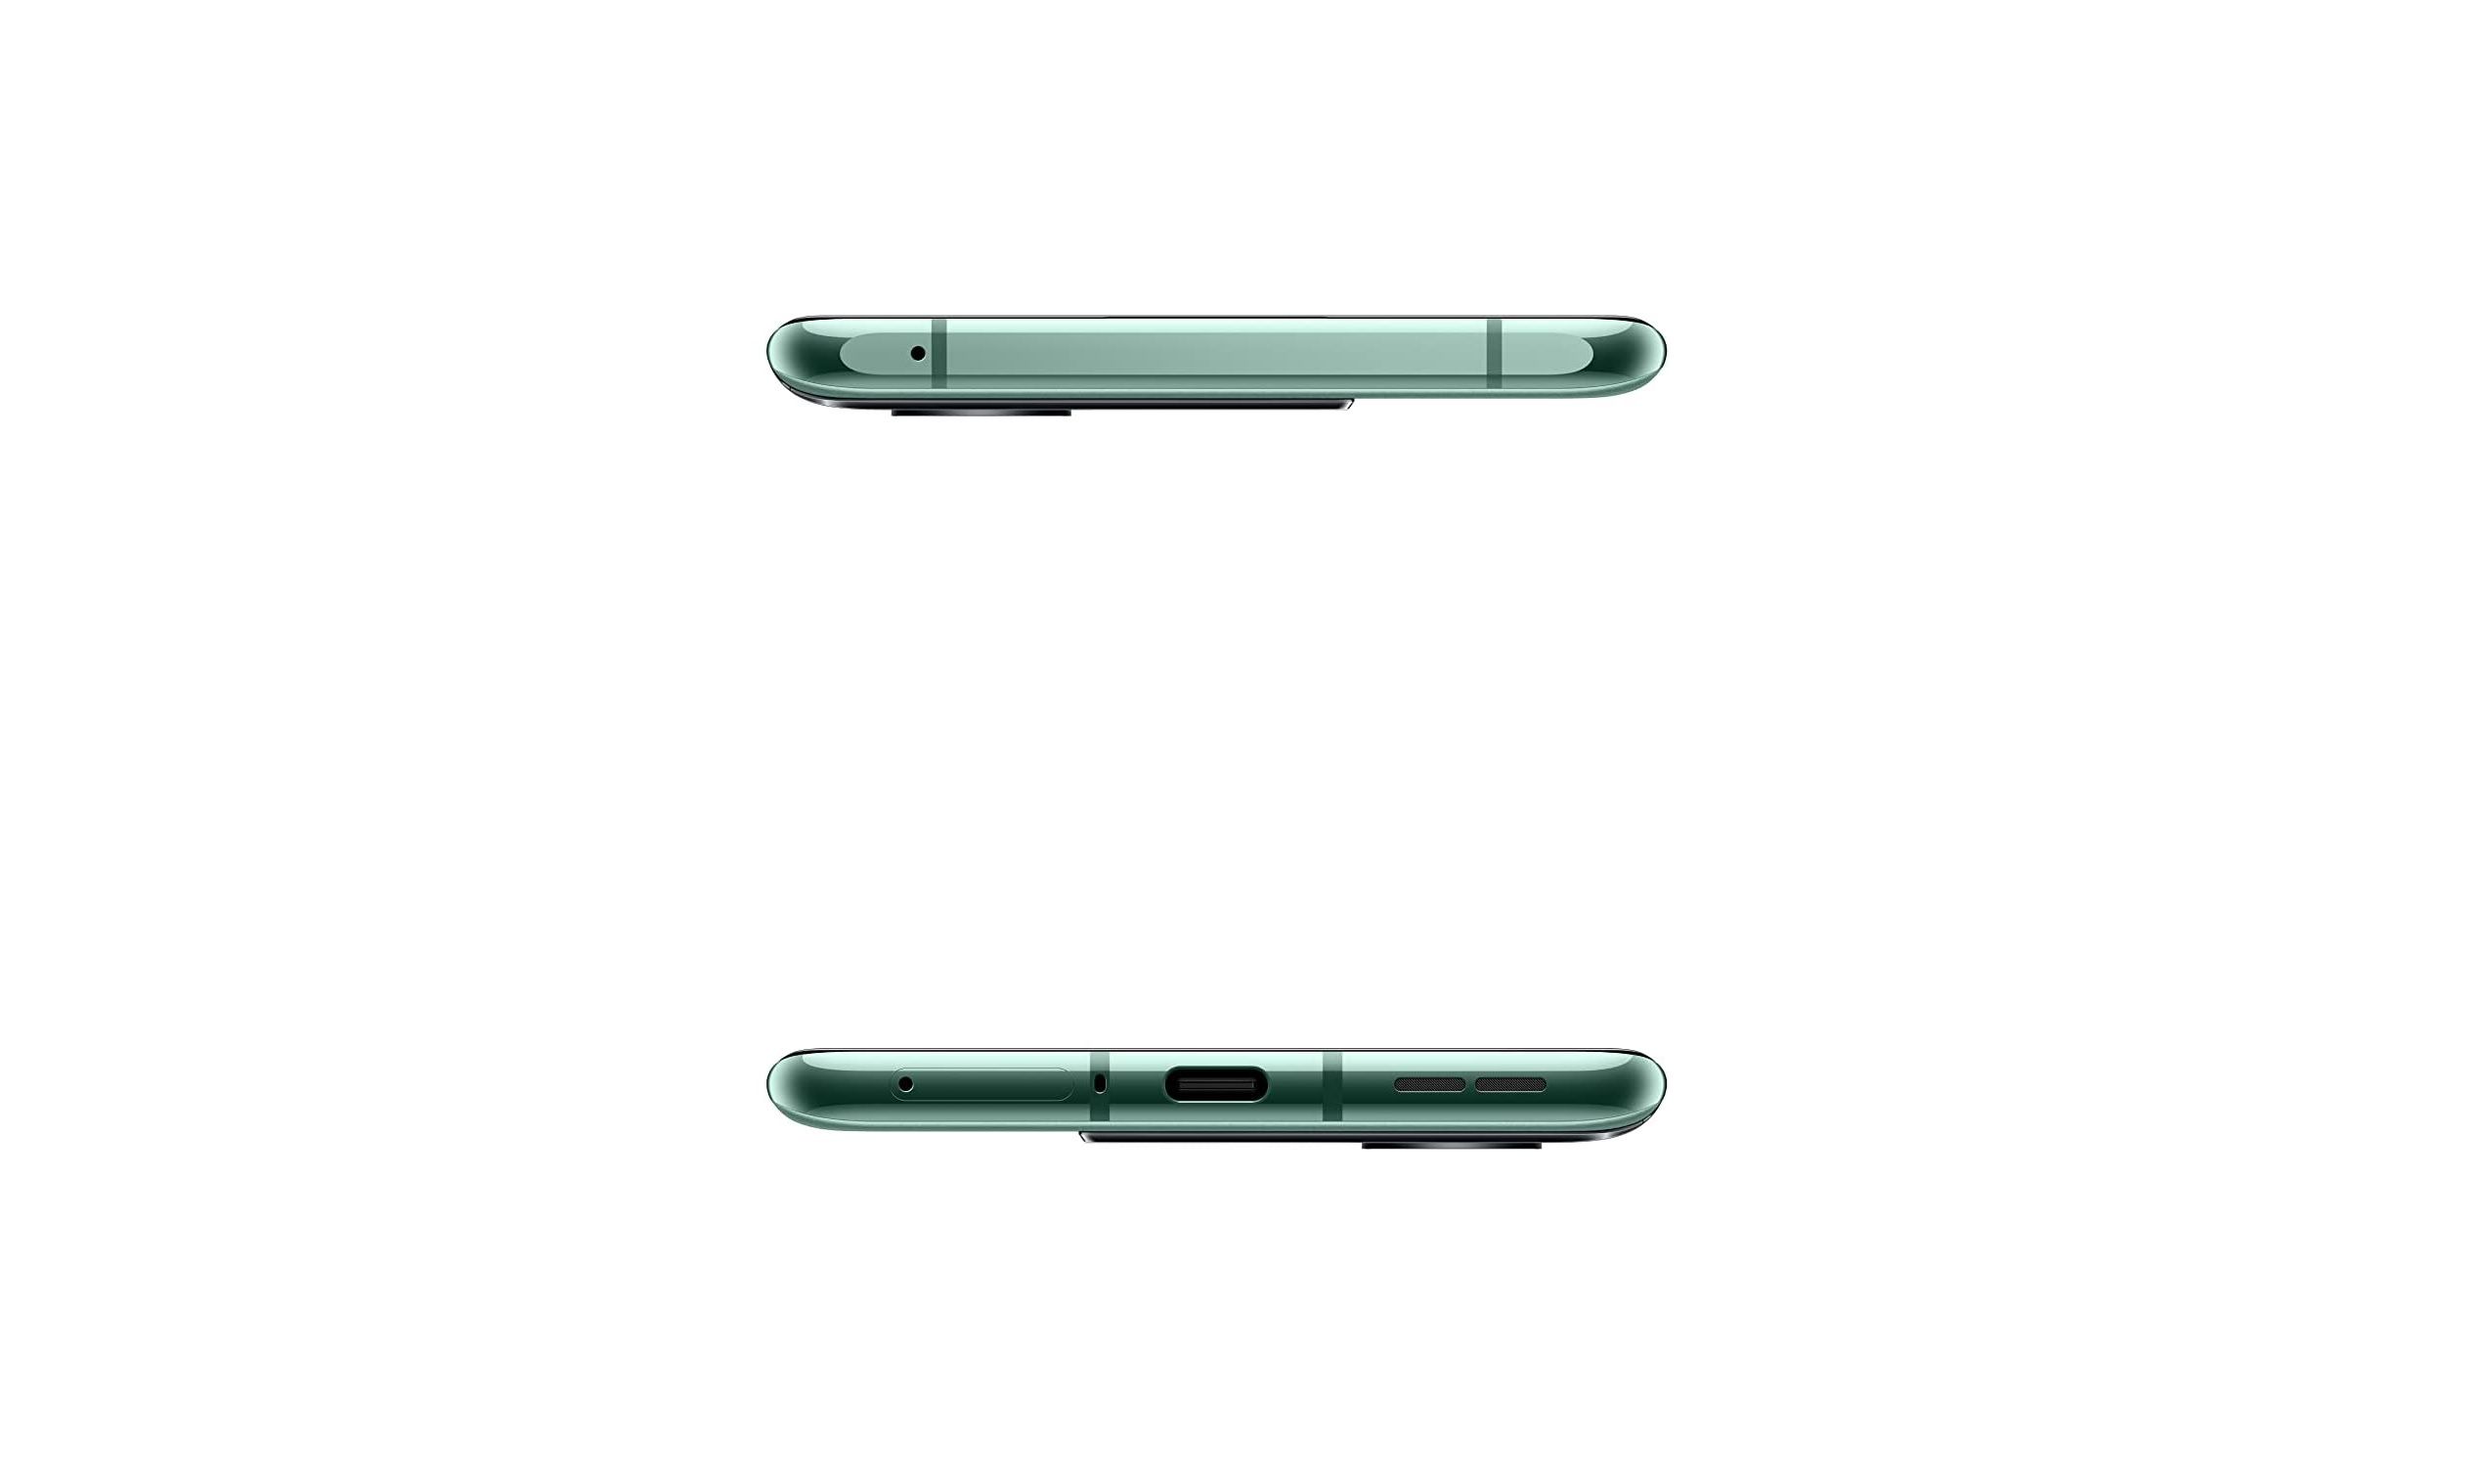 oneplus 10 pro smartphone with emerald forest finish and featuring usb c port